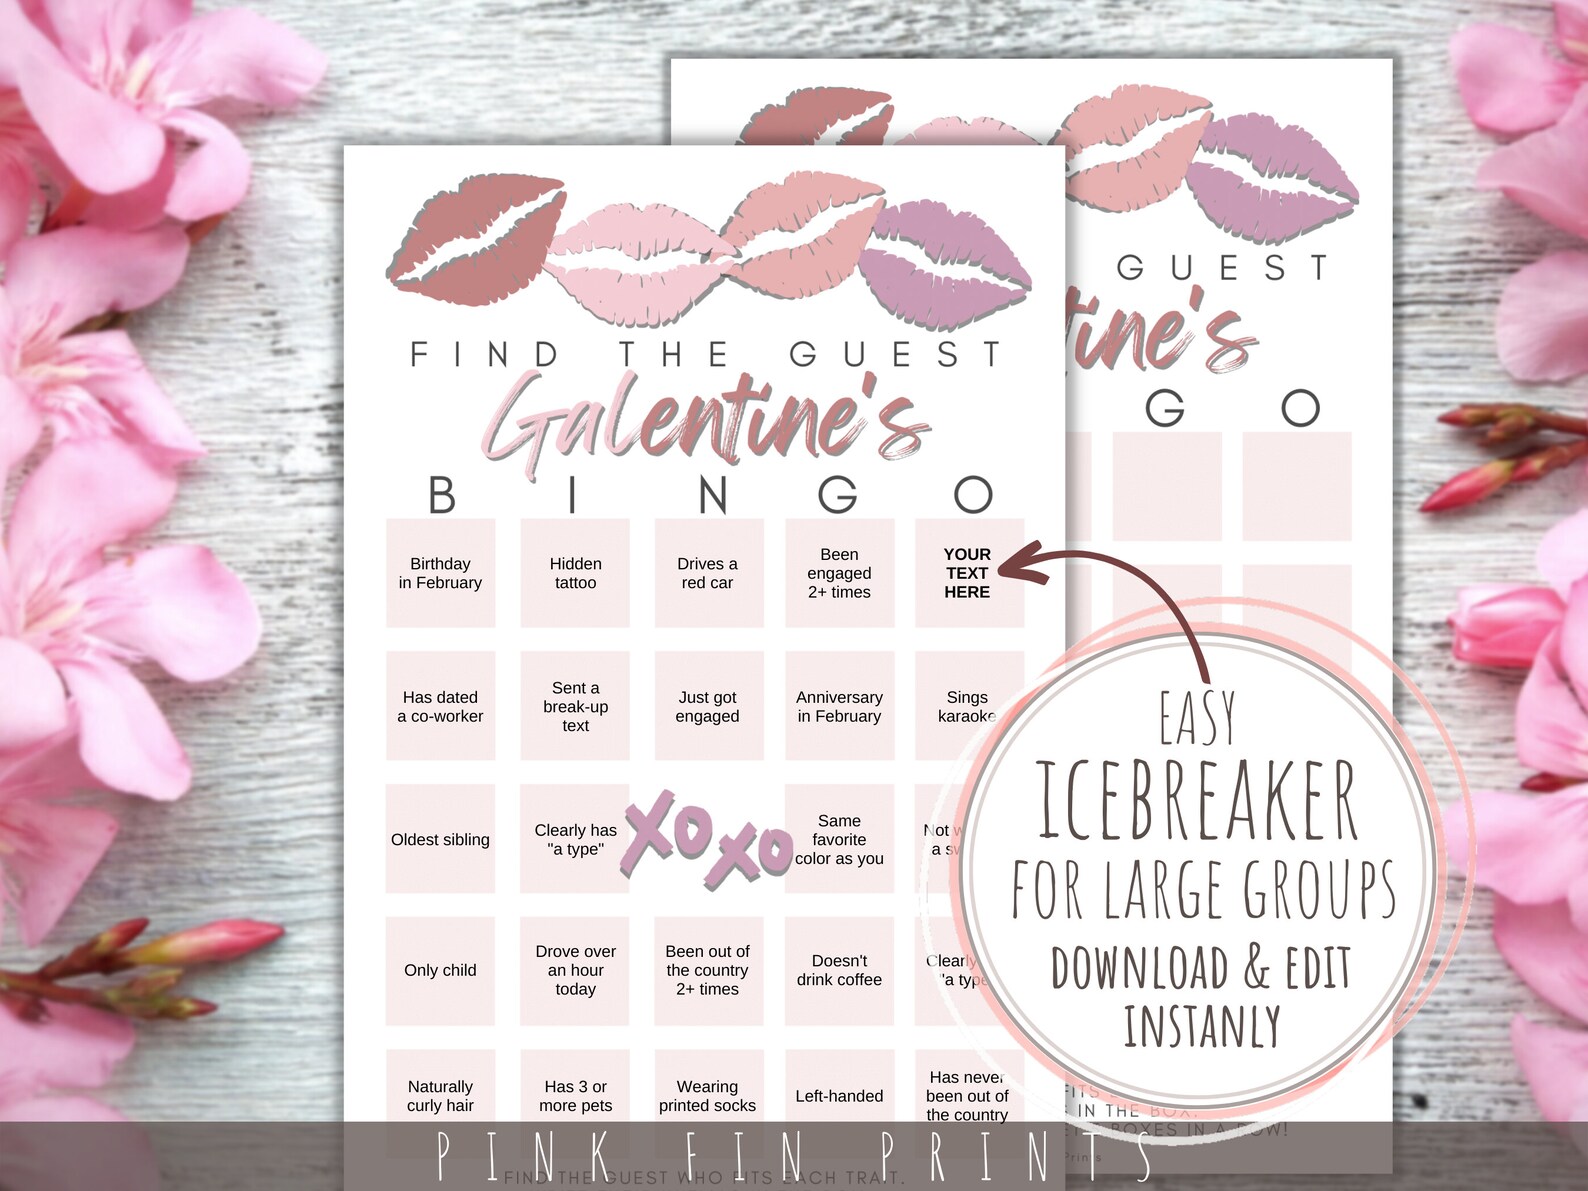 Galentine's Bingo Game for Girls Night Find the Guest - Etsy